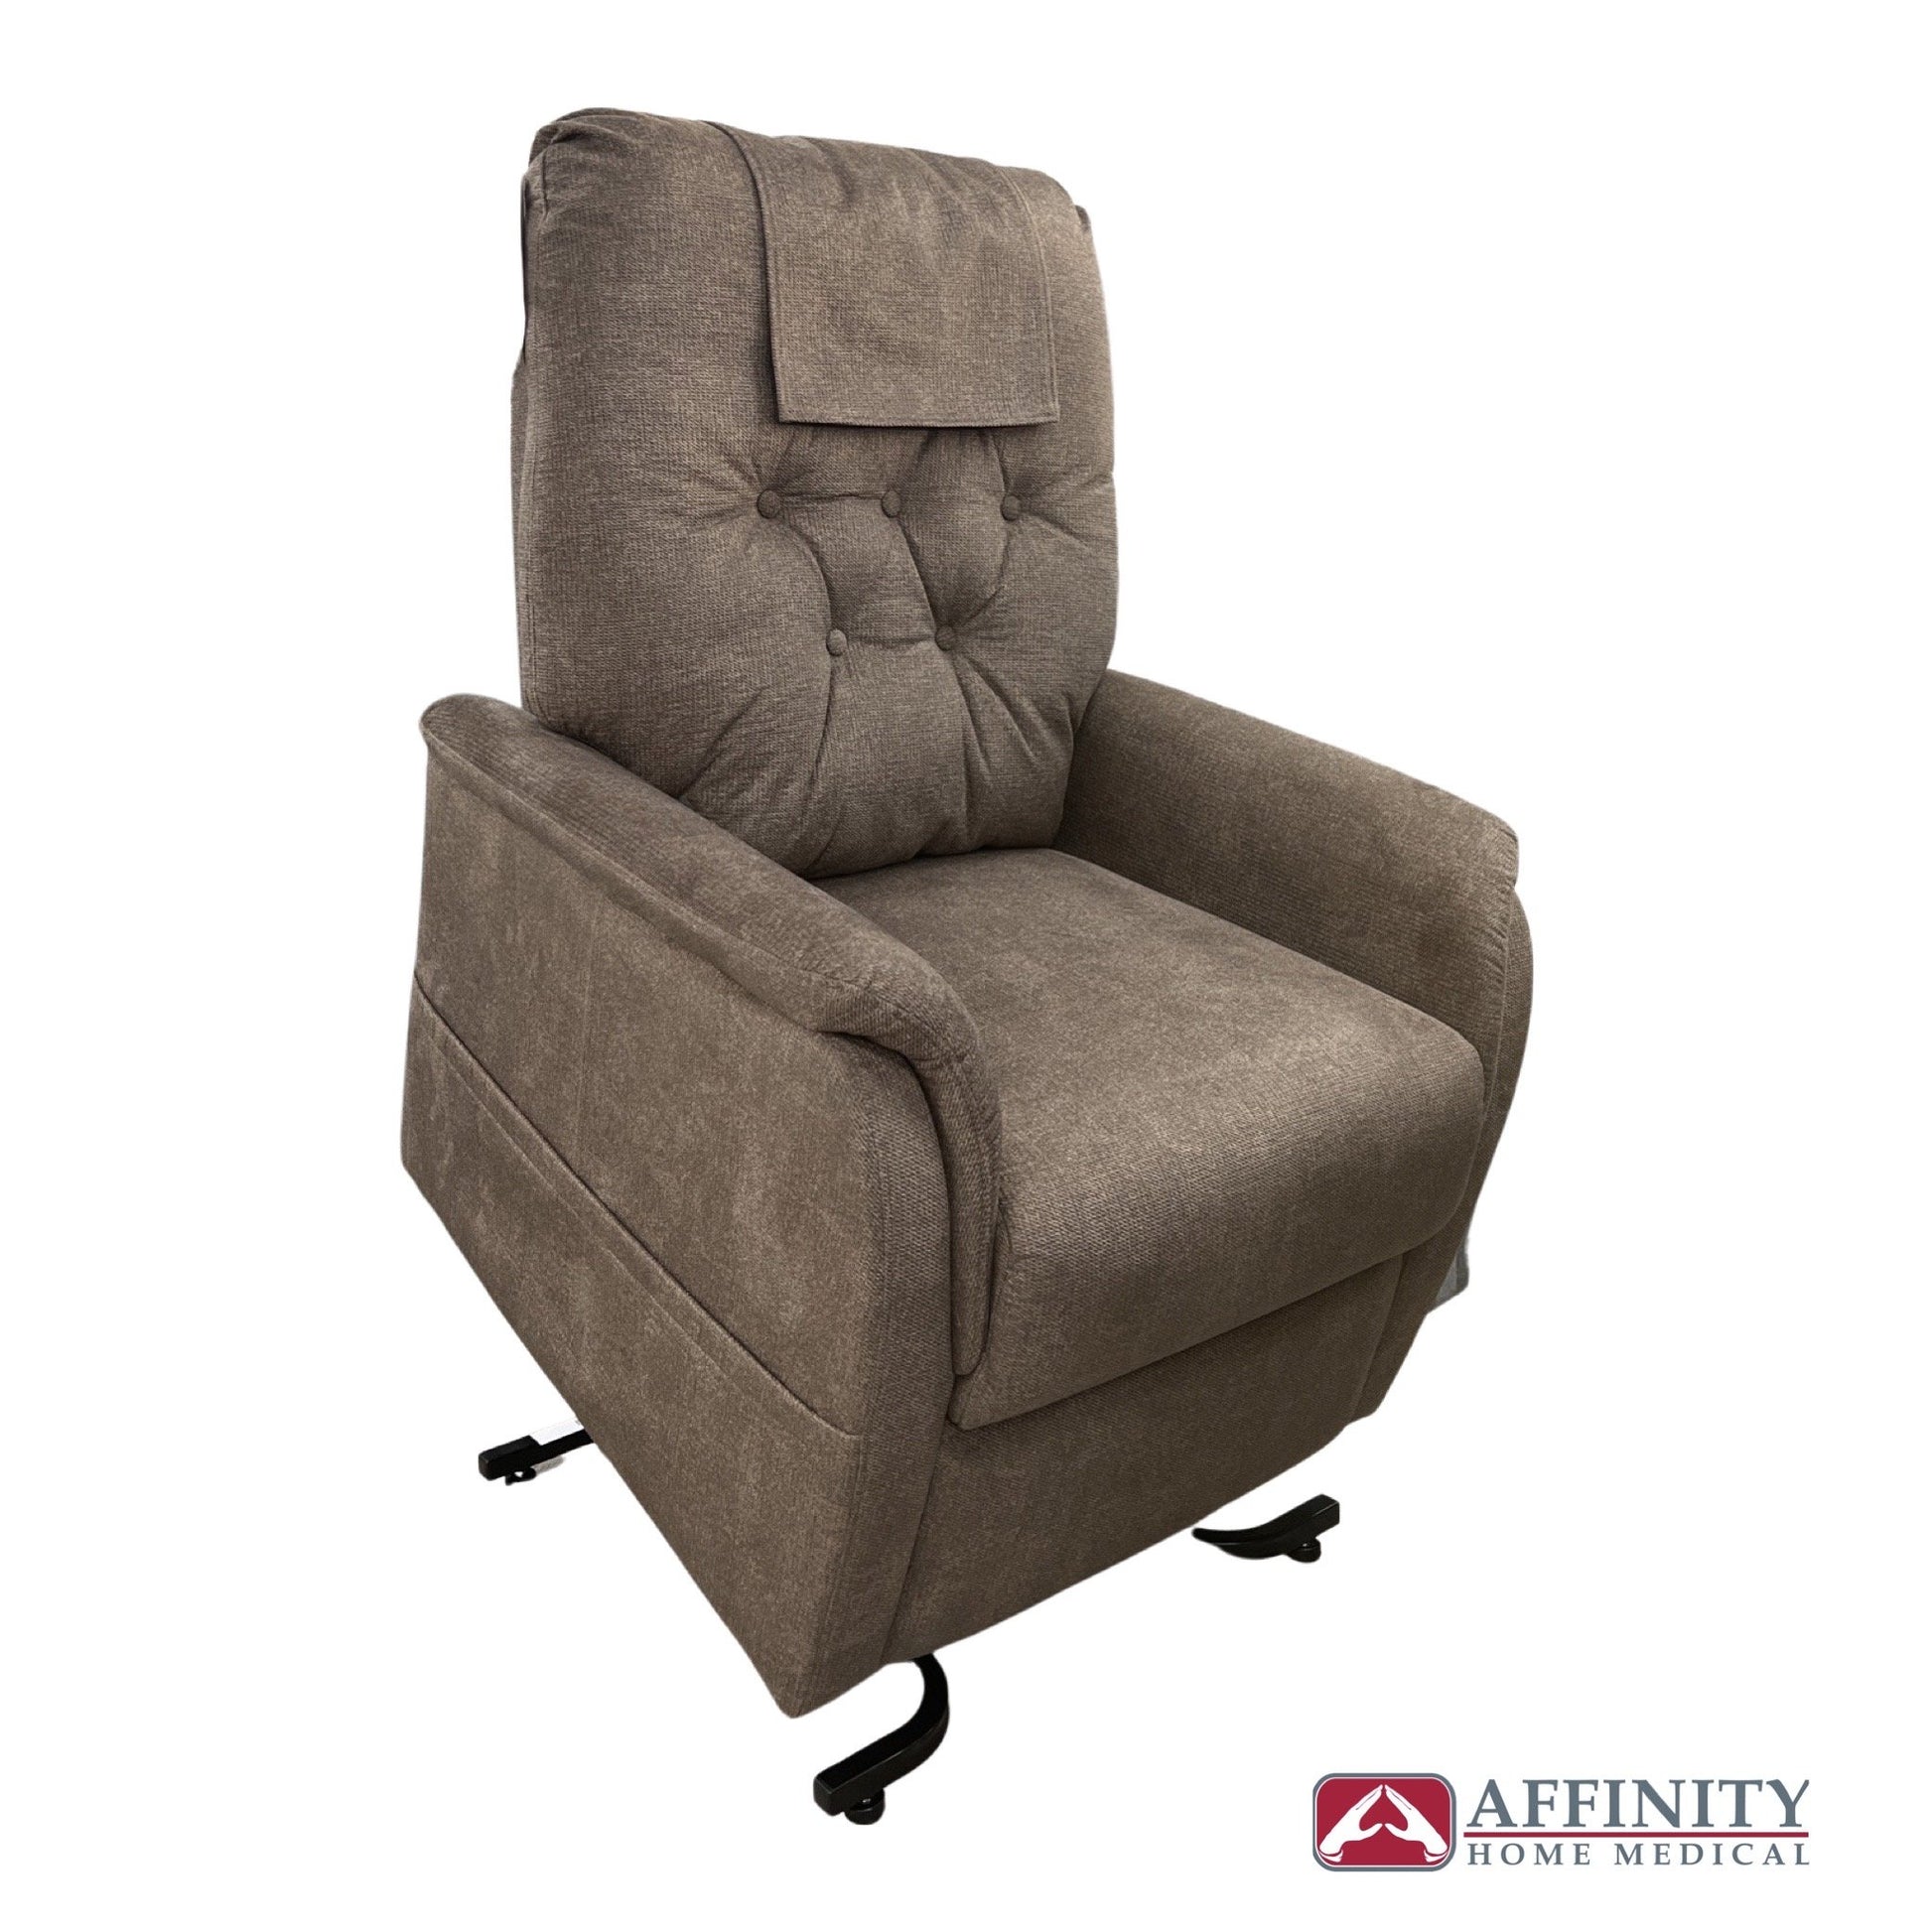 Capri 2 Position Lift Chair- Elk Fabric – Affinity Home Medical